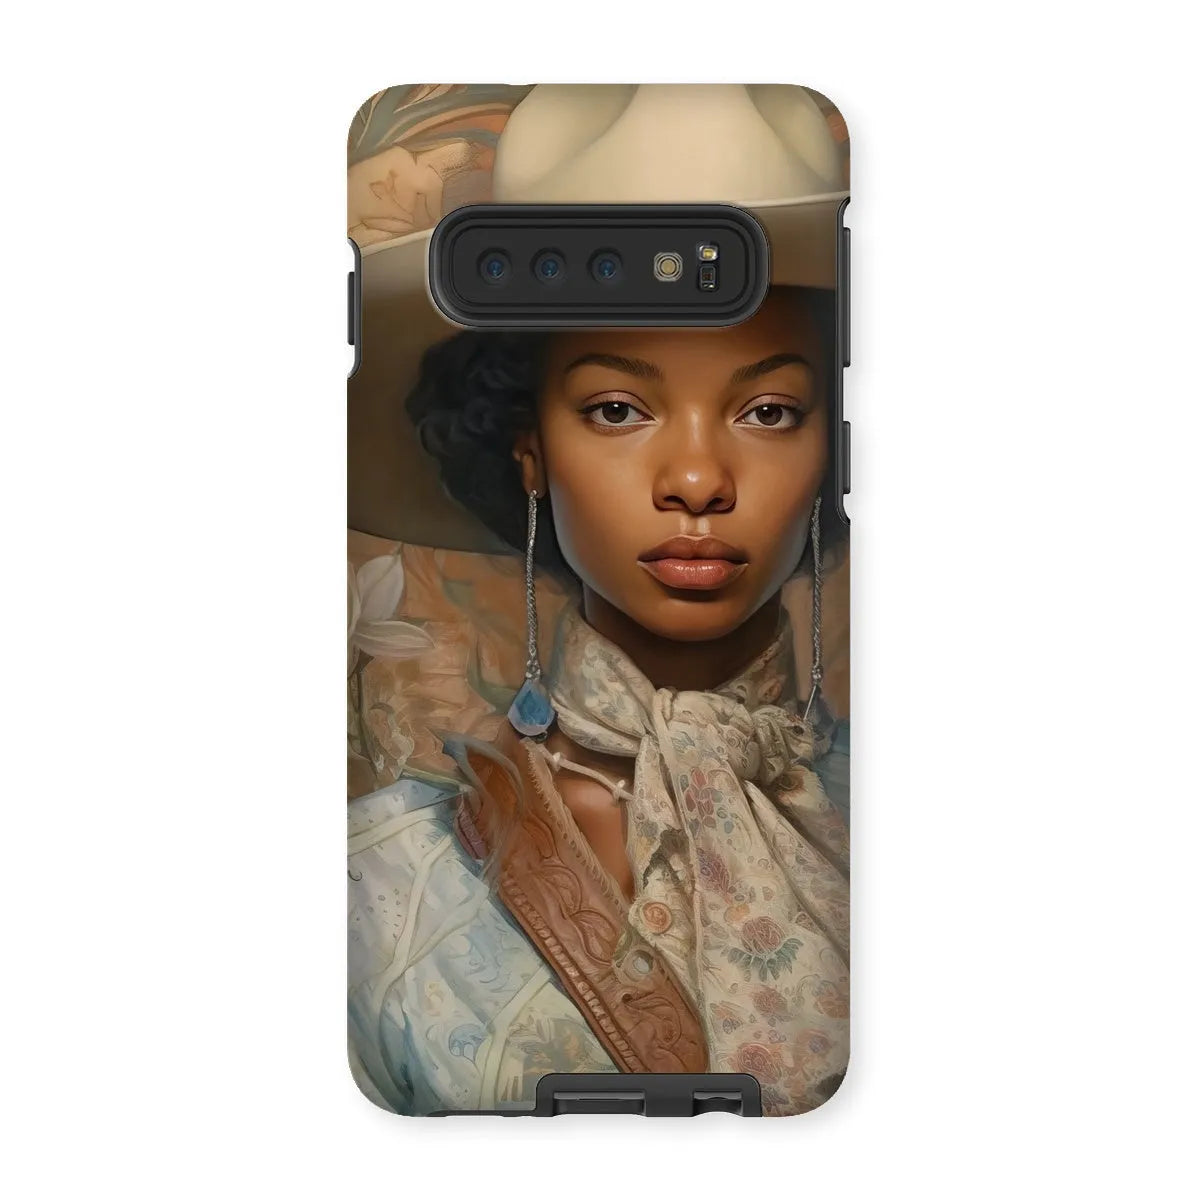 Imani The Lesbian Cowgirl - Sapphic Art Phone Case - Samsung Galaxy S10 / Matte - Mobile Phone Cases - Aesthetic Art